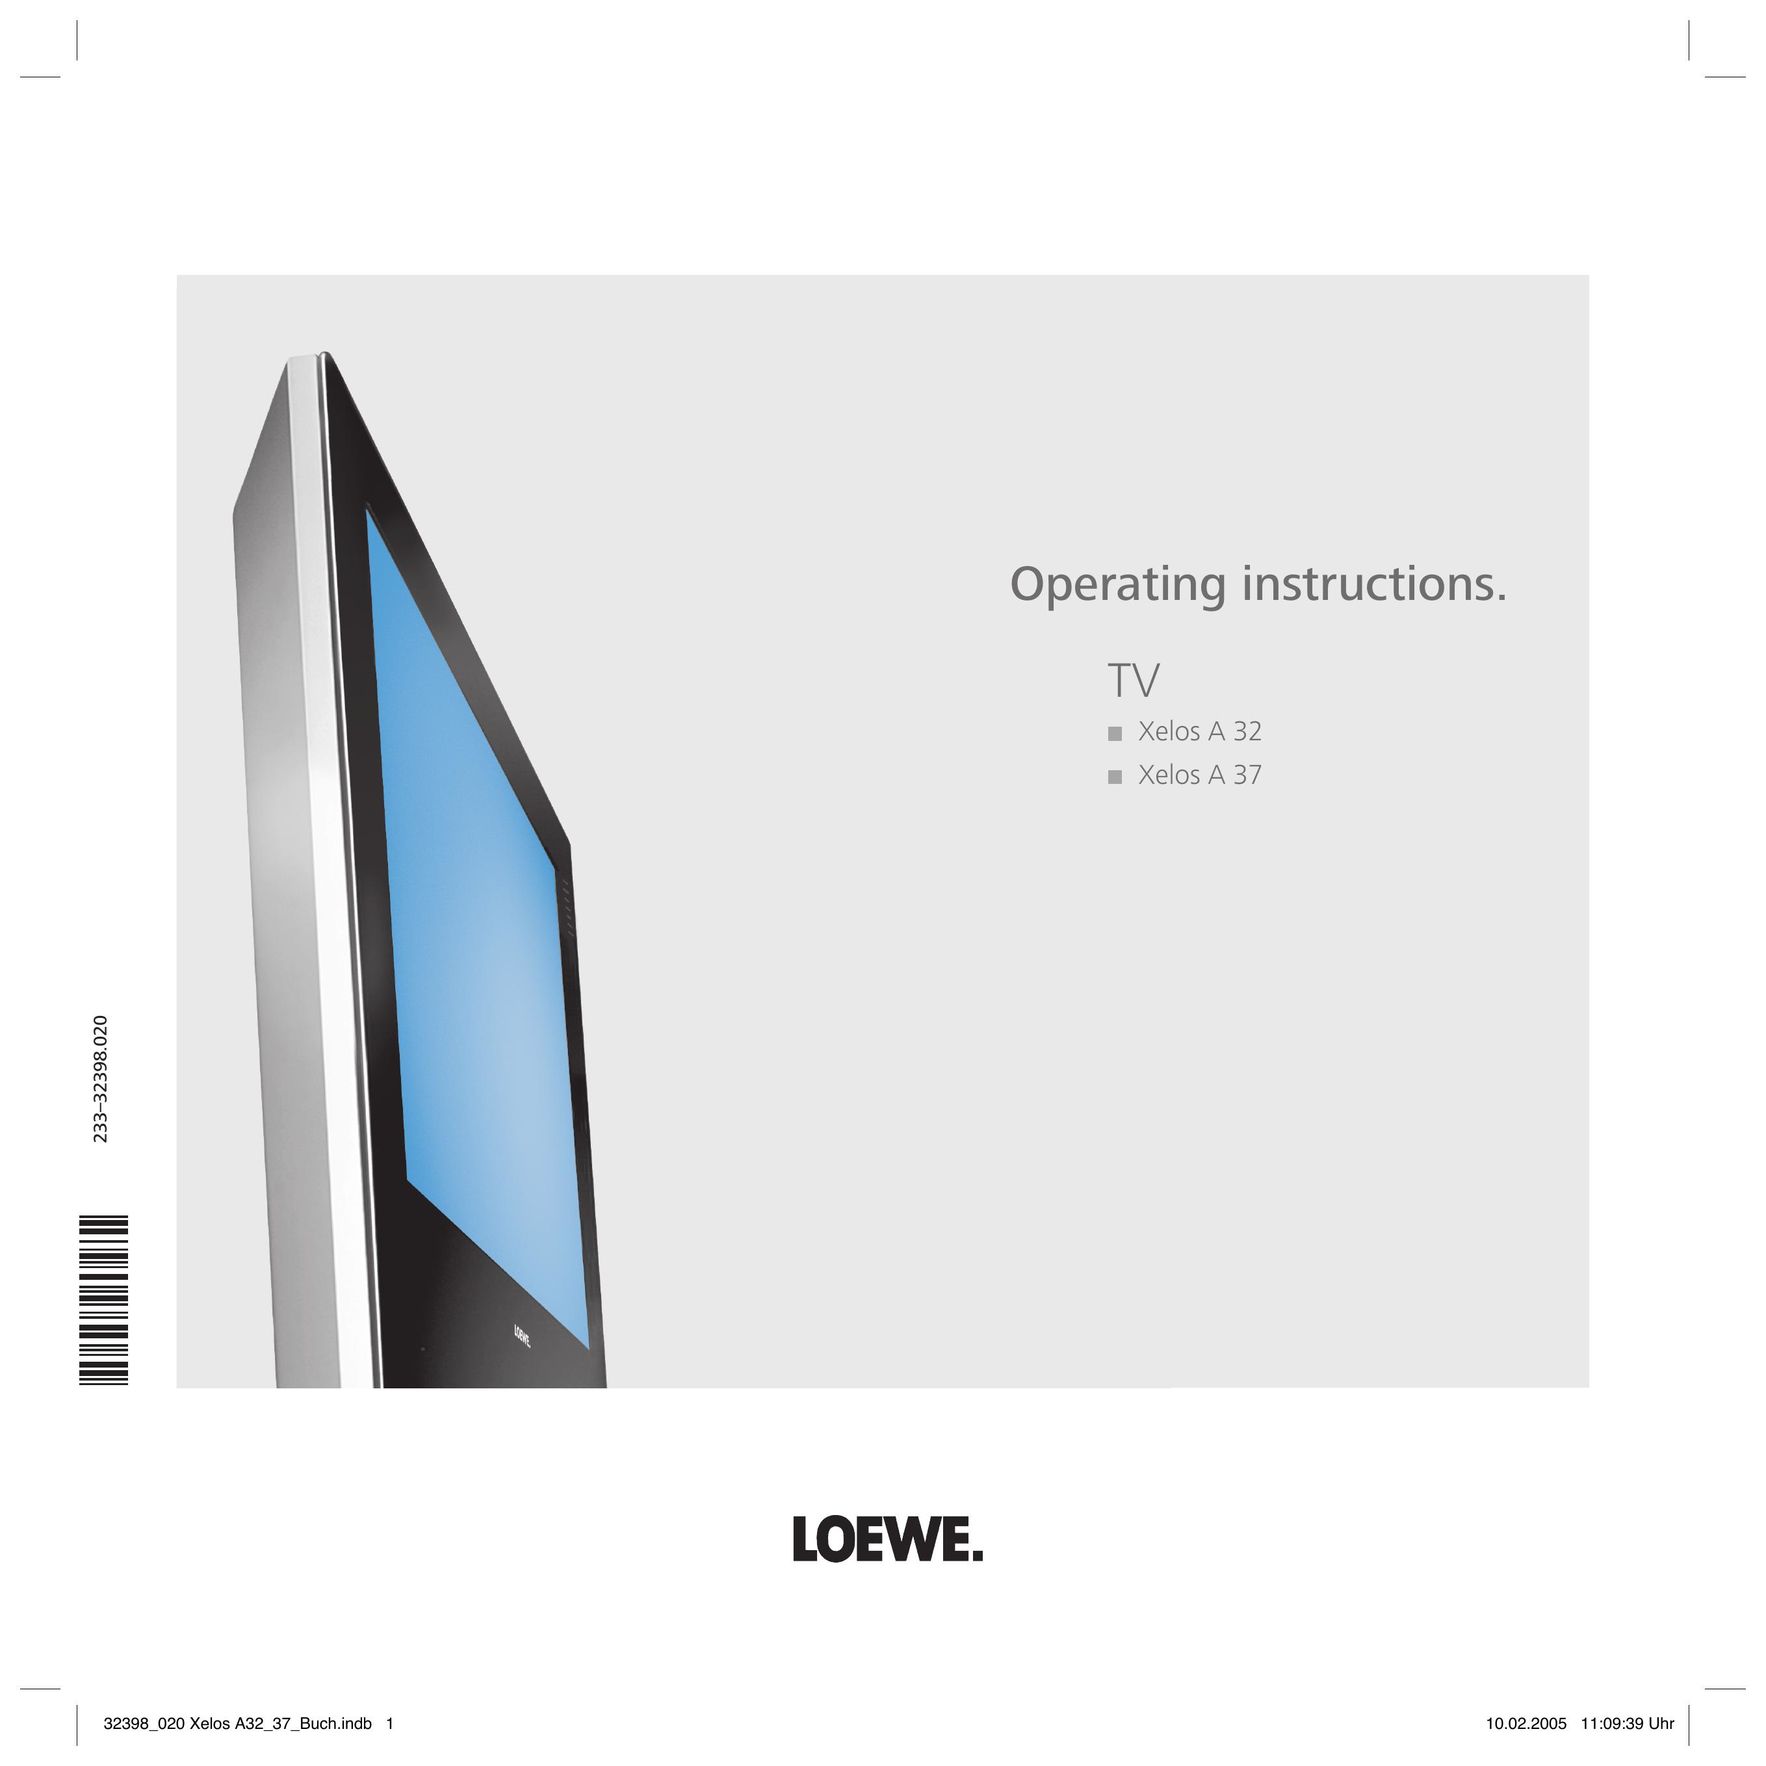 Loewe A 32, A 37 Flat Panel Television User Manual